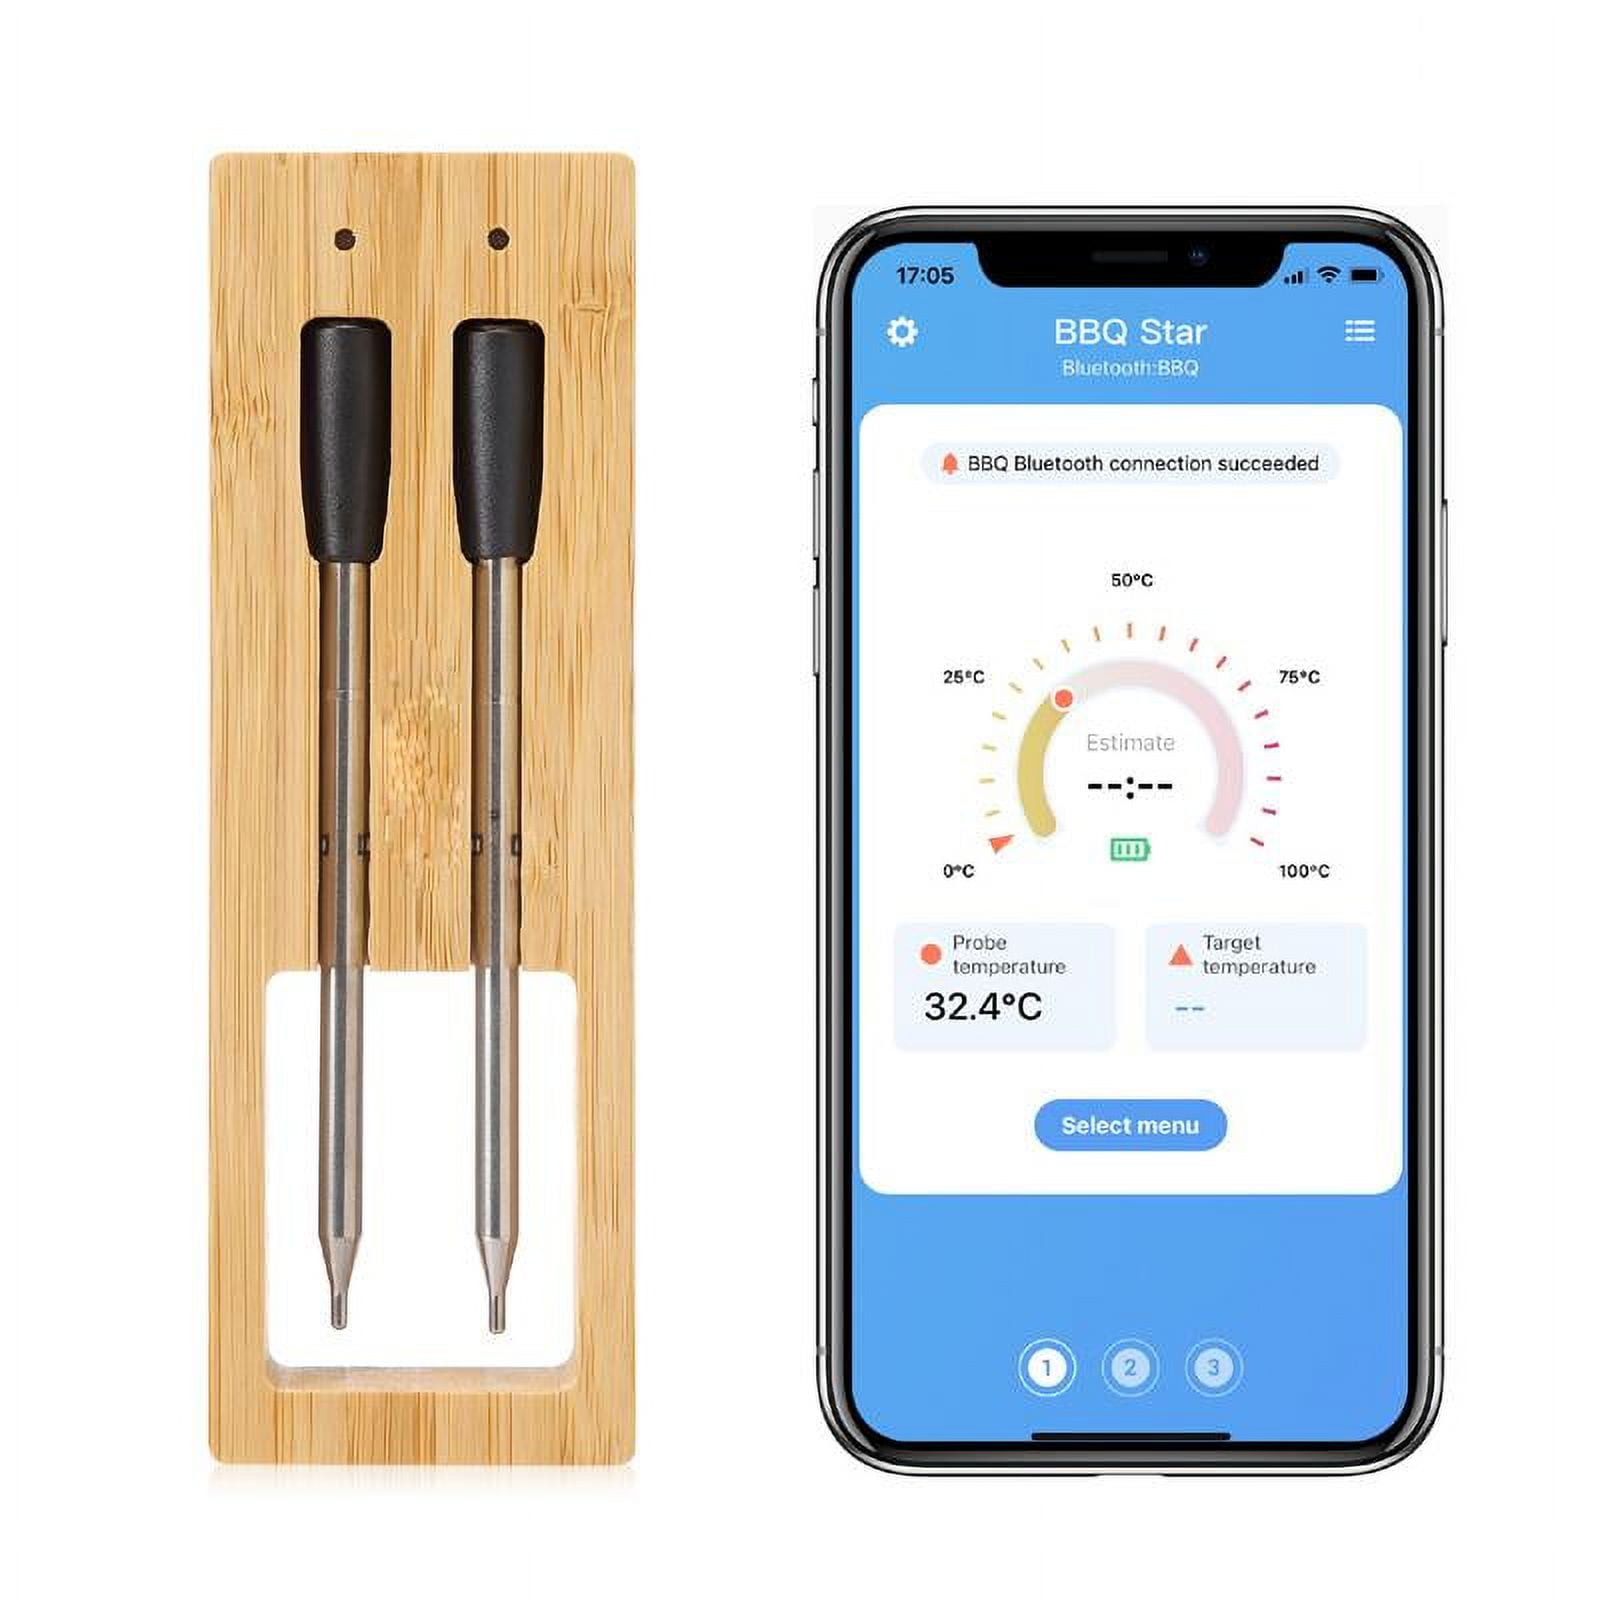 Wireless Meat Thermometer with Bluetooth for 164ft Range on The BBQ Grill  Rotisserie Oven, Digital Bluetooth Meat Thermometer with More Recipes of